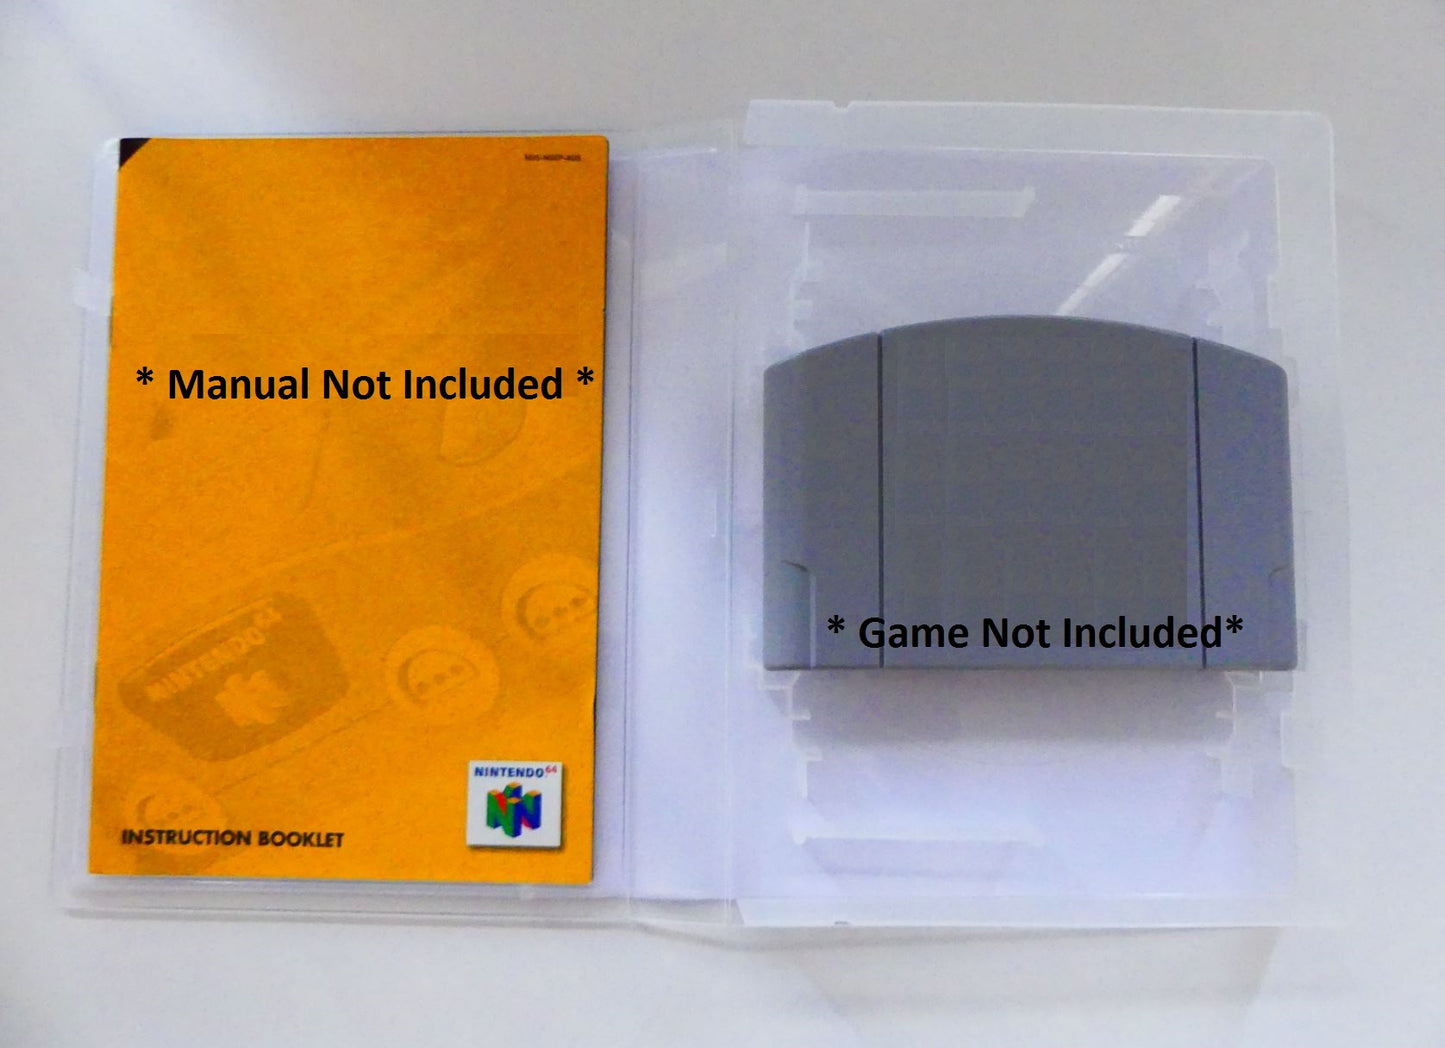 Jet Force Gemini - N64 Replacement Case